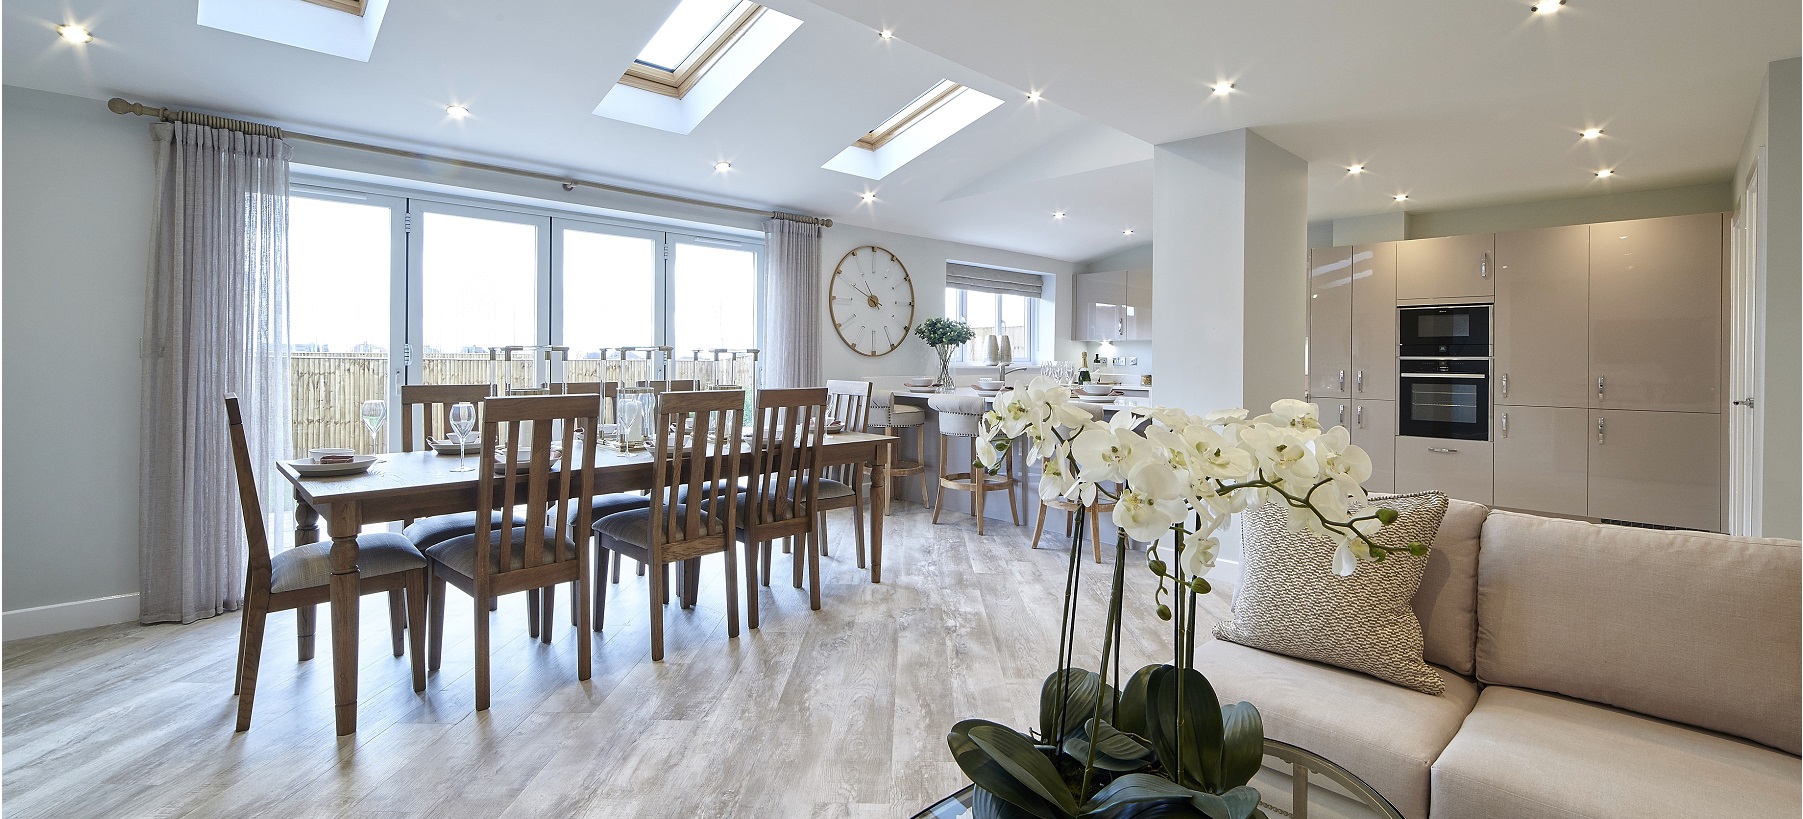 The Bentley at Cavendish Park in Bolsover. Open plan living.